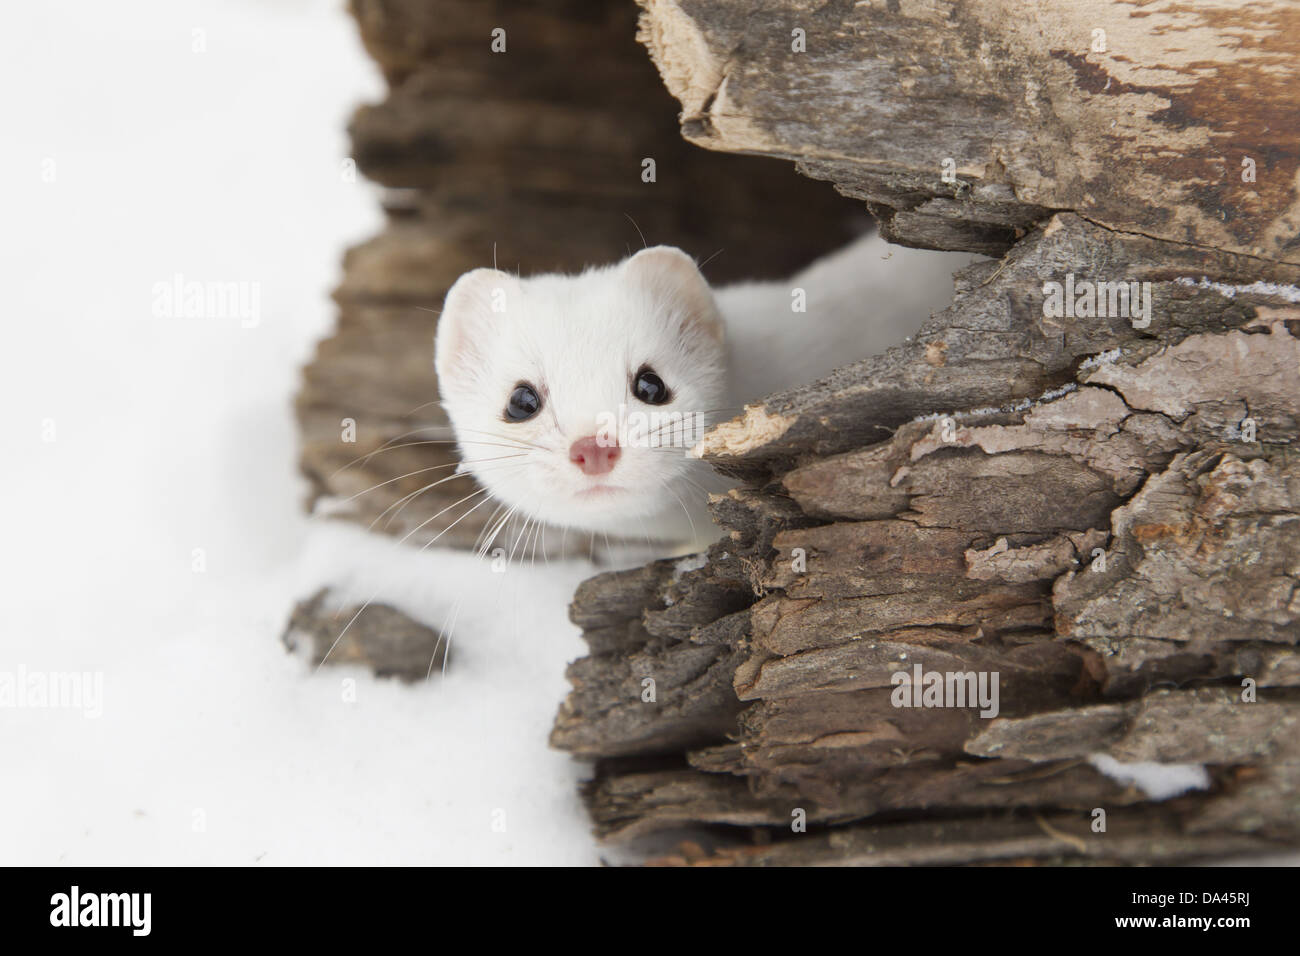 Stoat (Mustela erminea) adult in 'ermine' white winter coat peering out from hollow log in snow Minnesota U.S.A. January Stock Photo